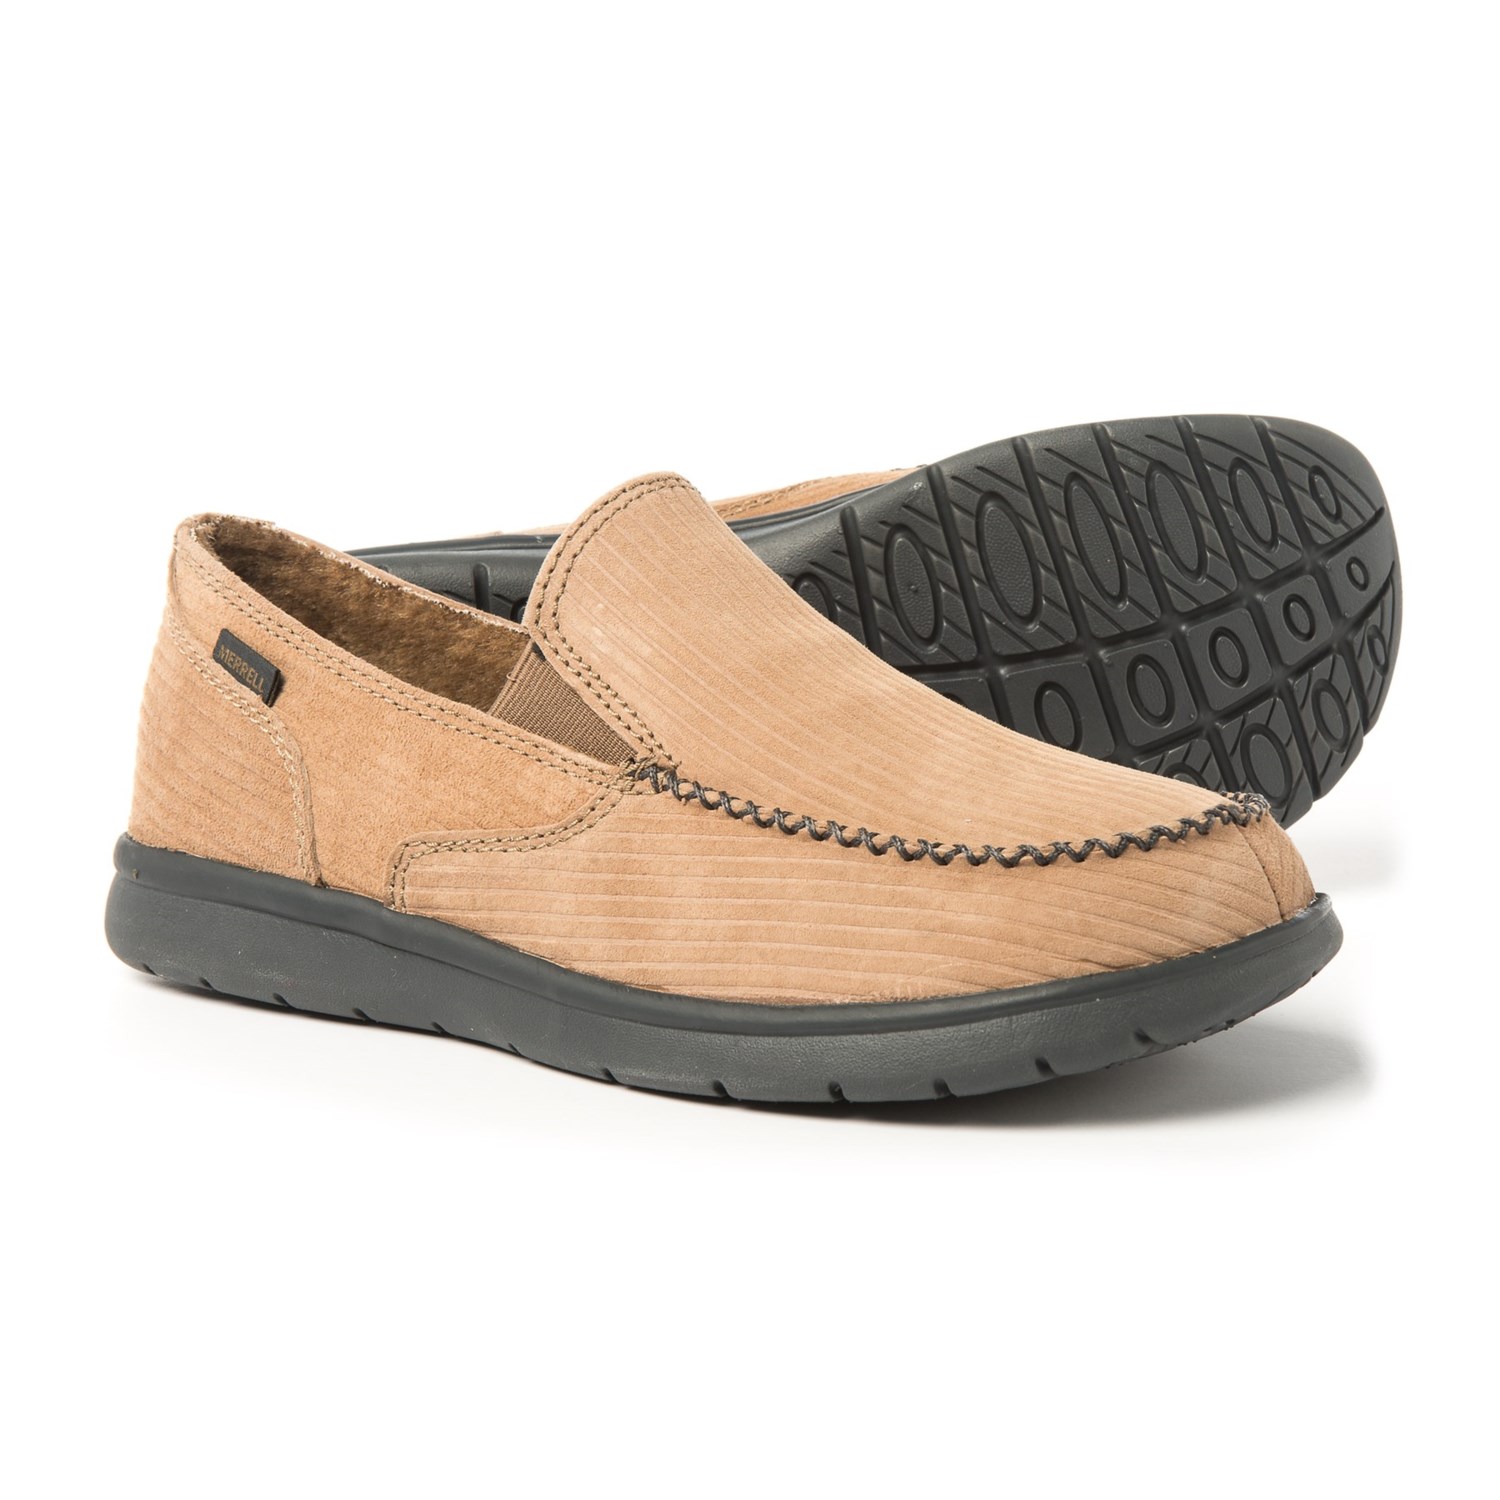 Merrell Moc Shoes (For Men) - Save 74%